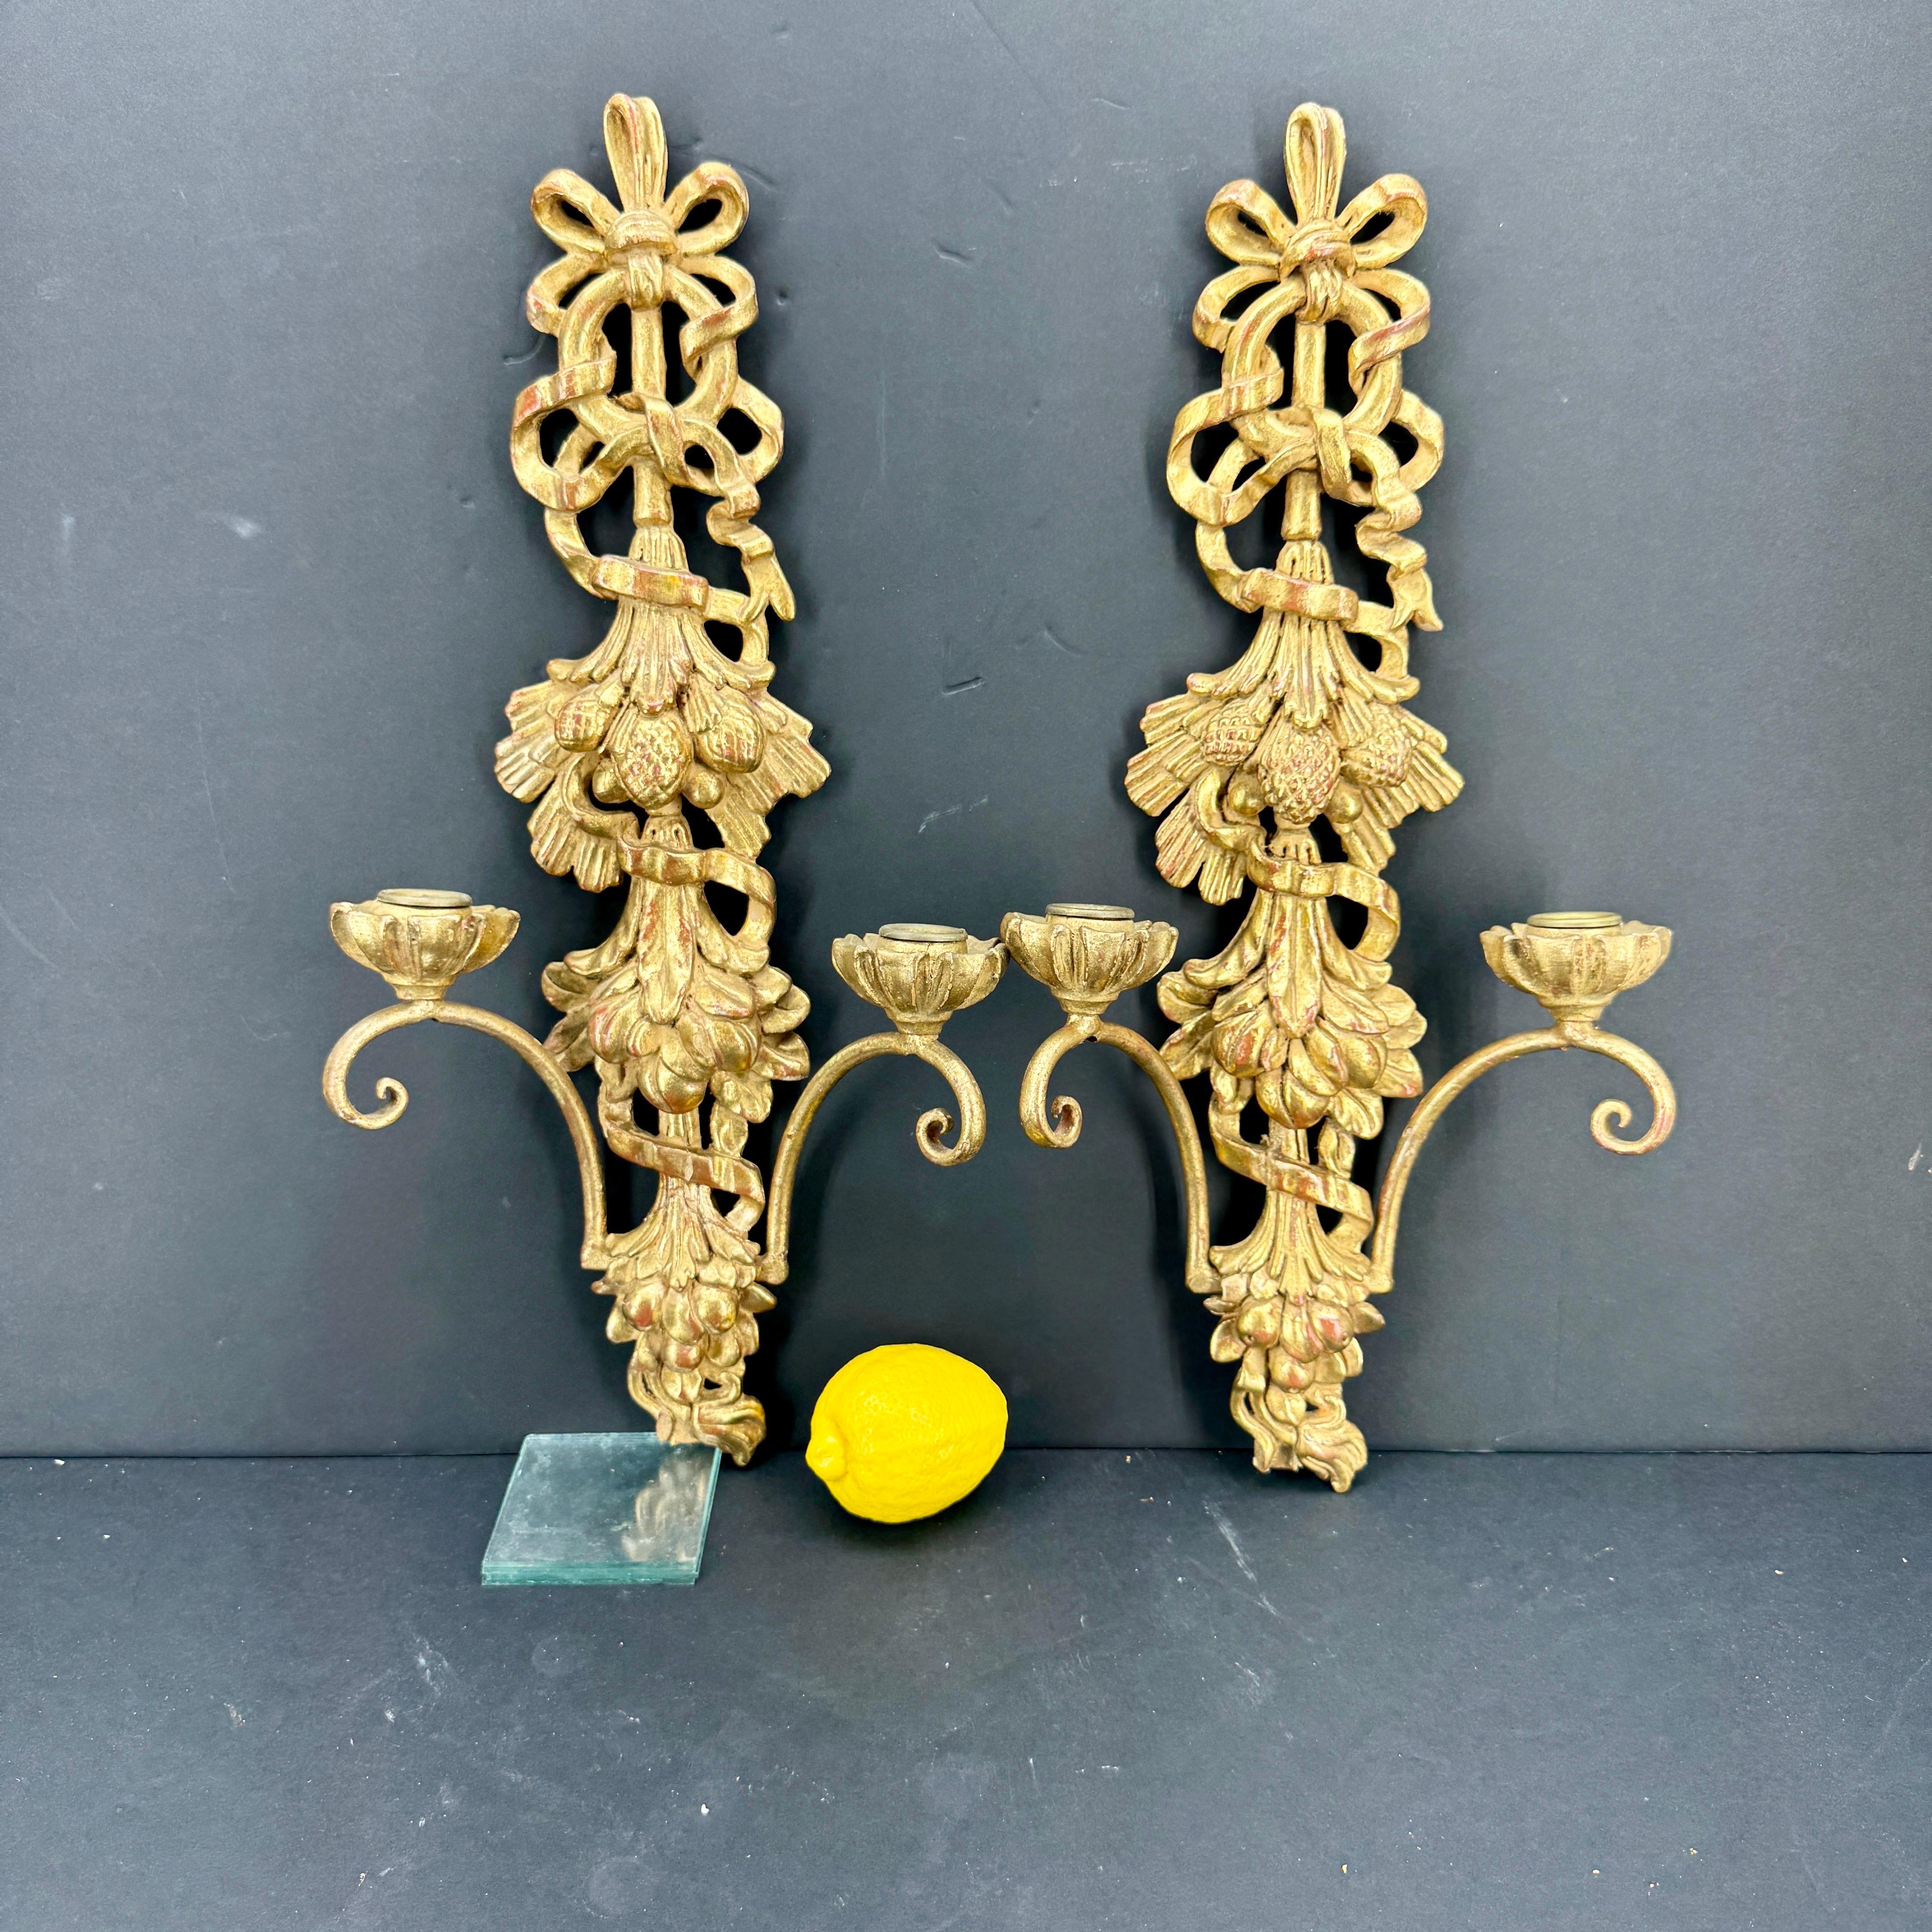 Pair of Italian Louis XVI Giltwood Wall Sconces Appliques For Sale 8